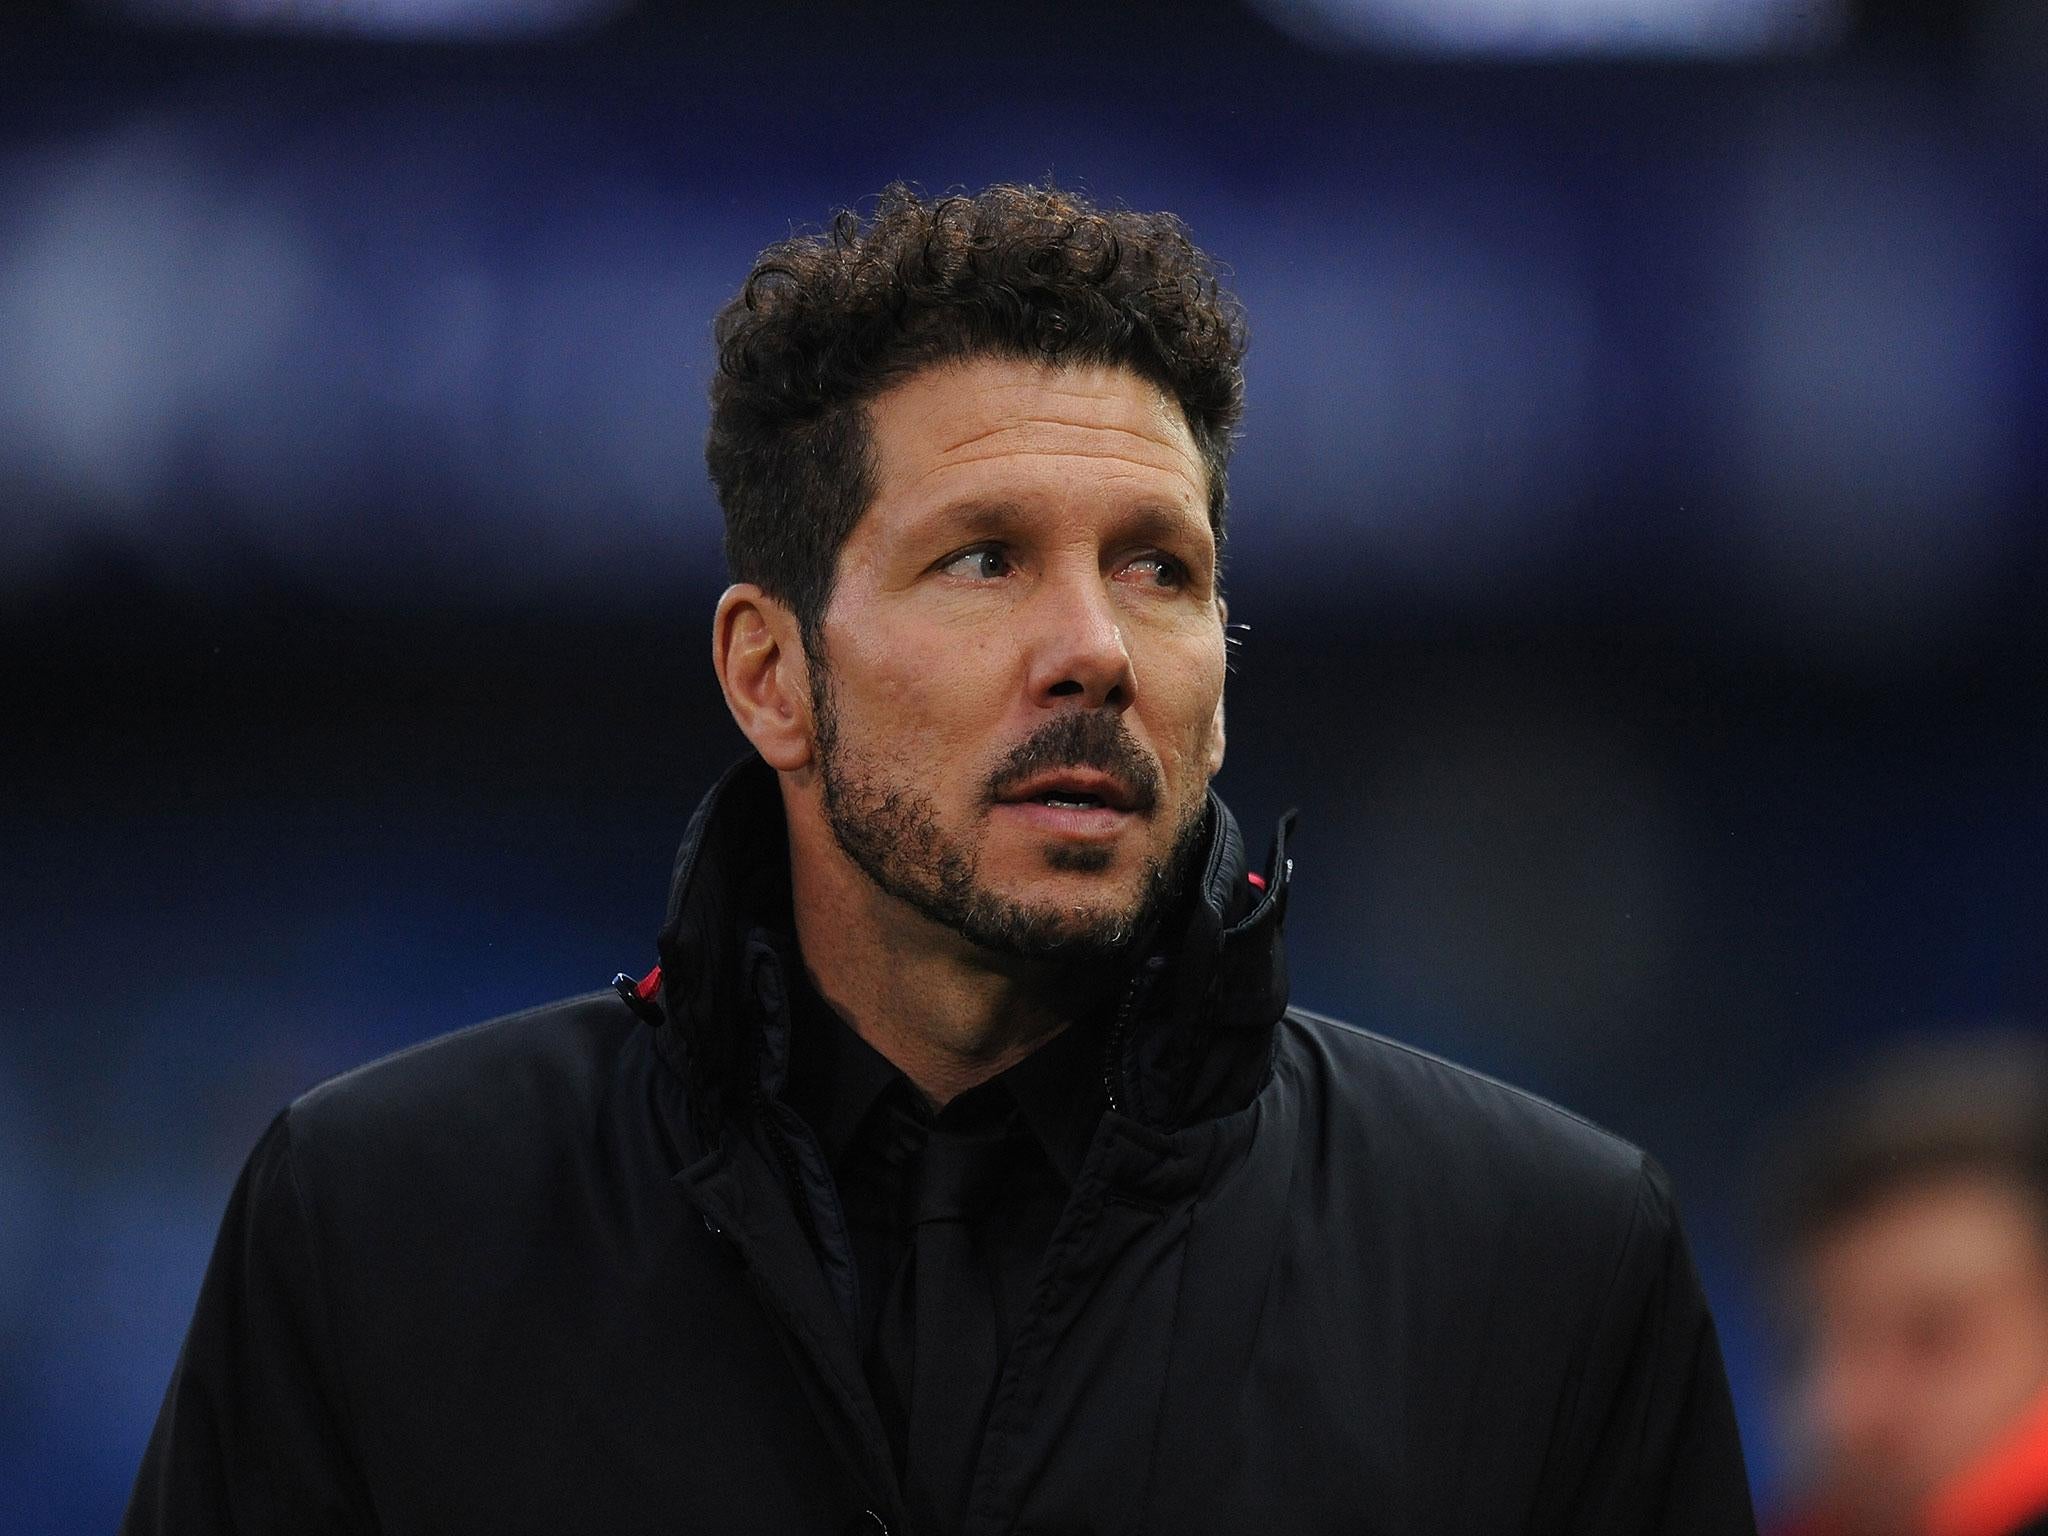 Atletico Madrid manager Diego Simeone would be in contention to replace Arsene Wenger at Arsenal